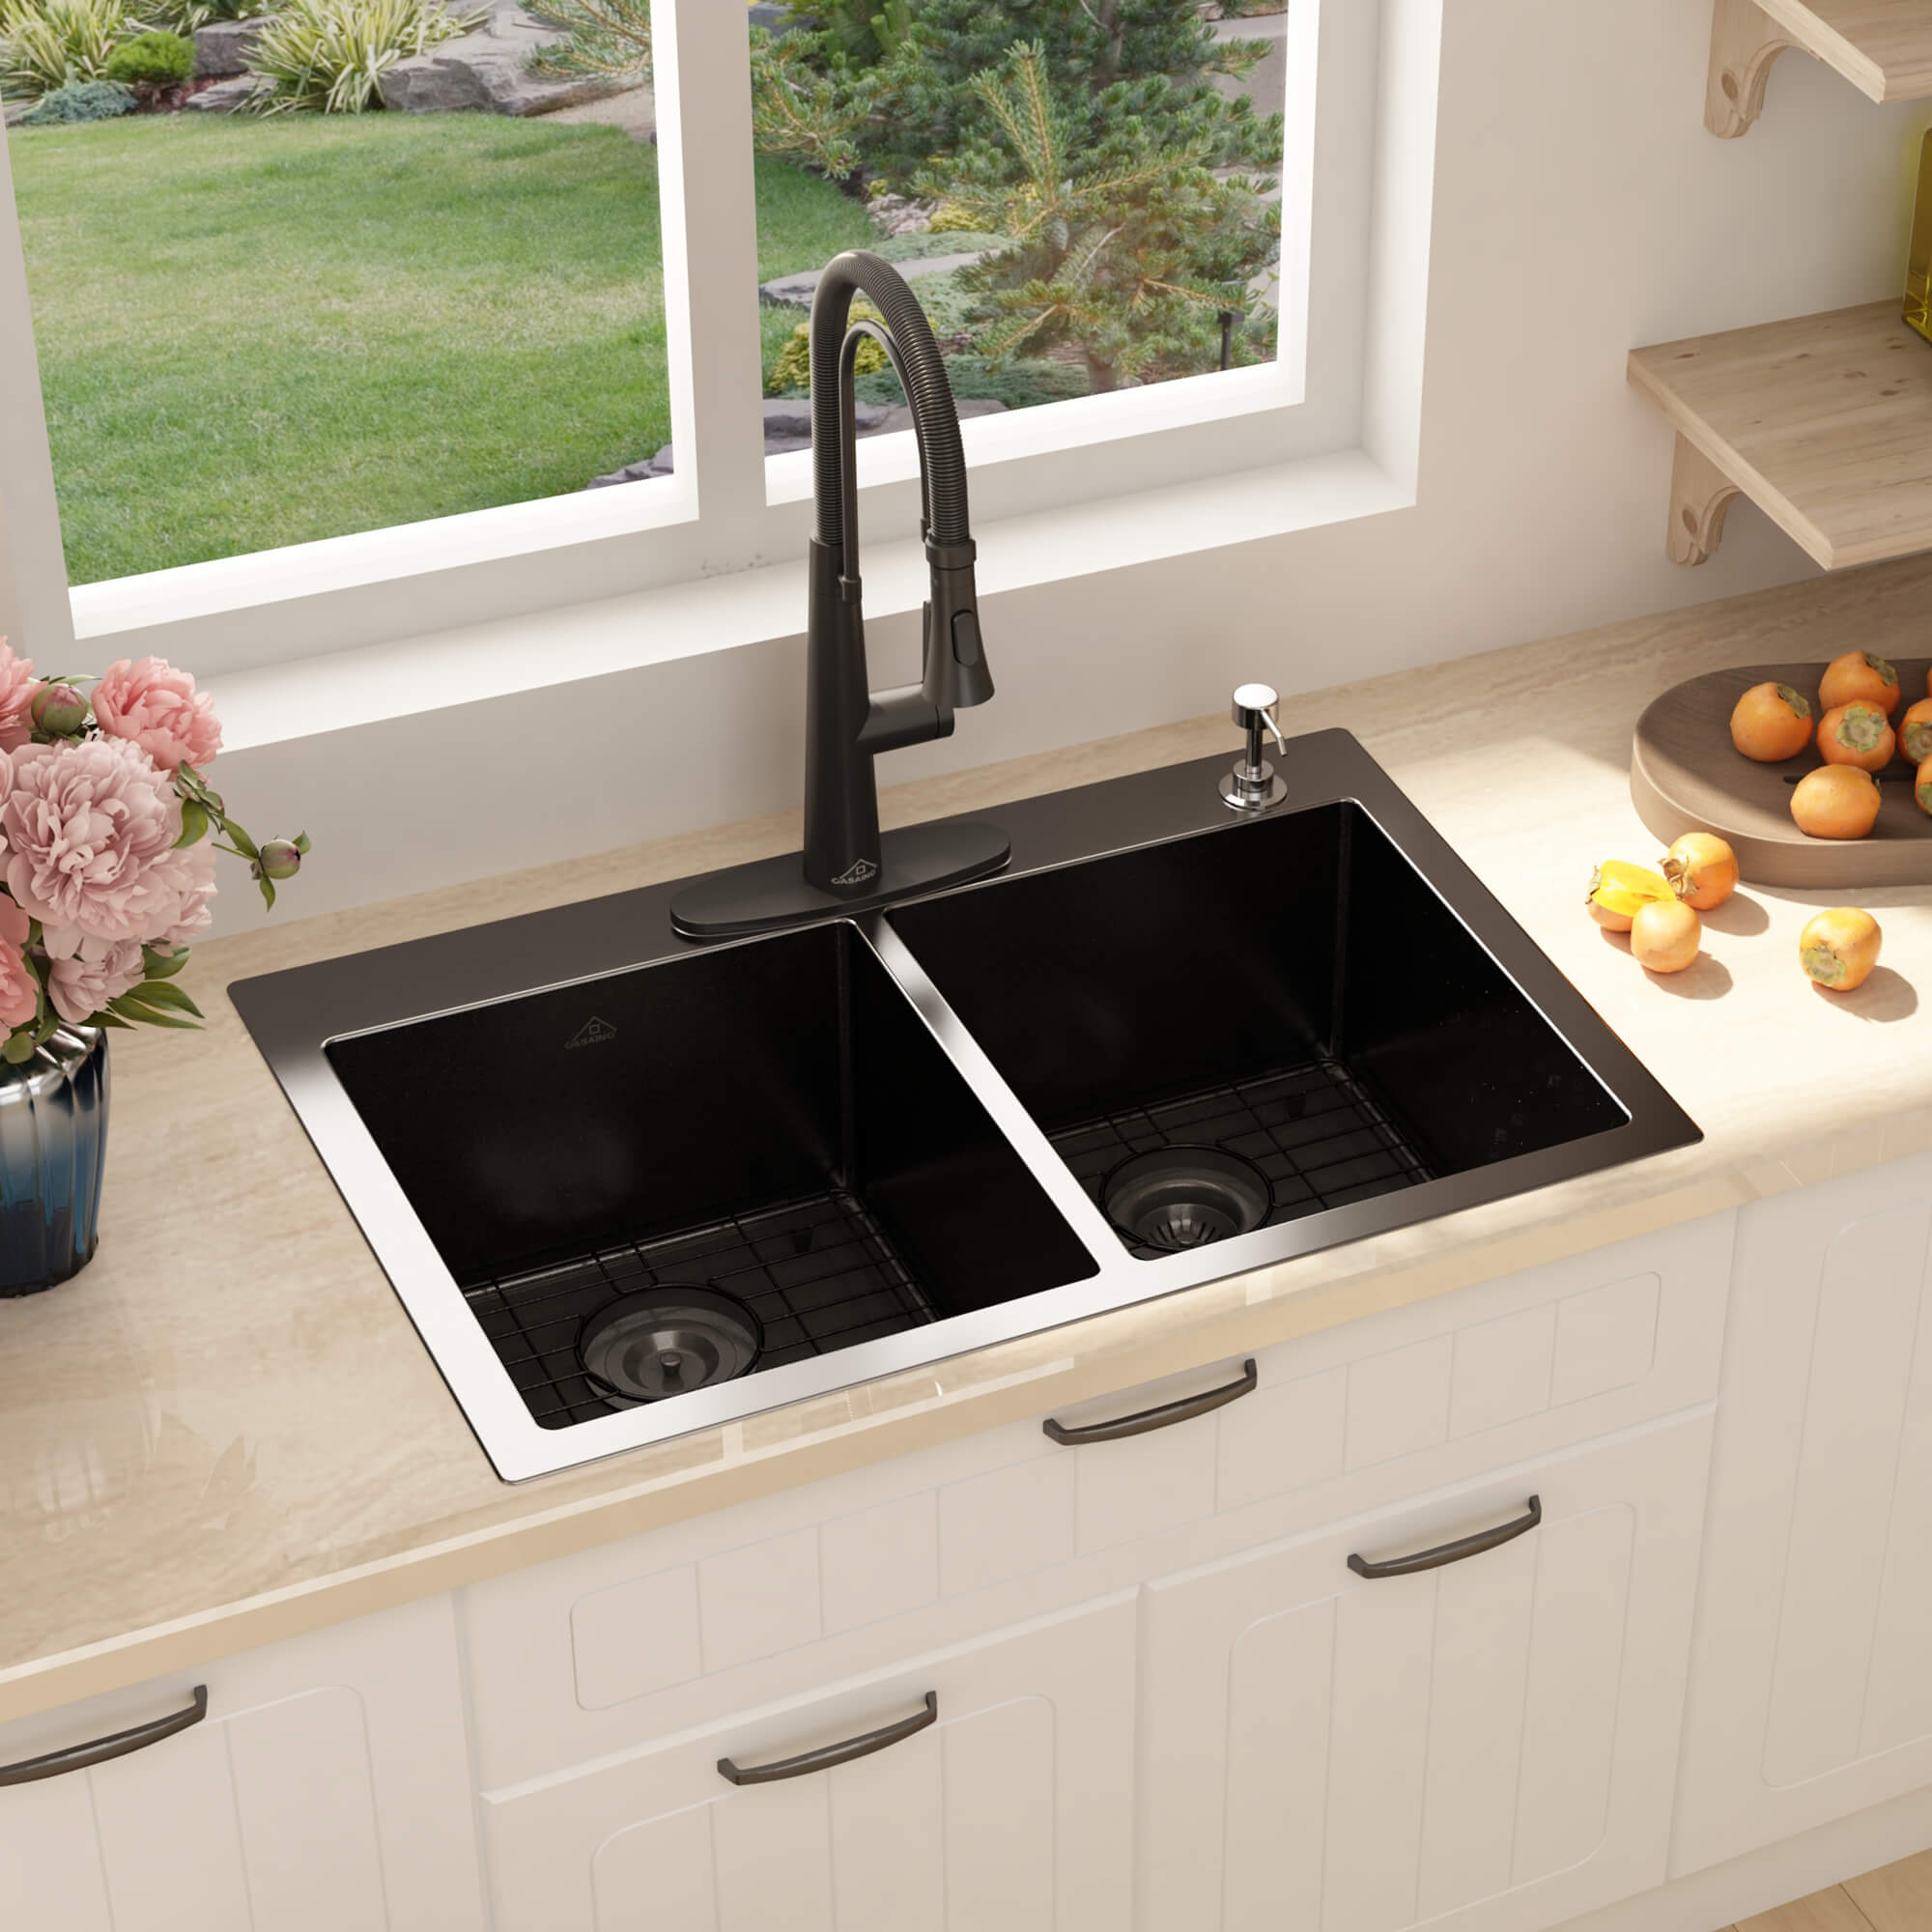 33" Efficient Double Basin 304 Stainless Steel Double Basin Sink with Nano-Coating for Easy Cleaning, Quick Drainage, Silent Operation, PVD Technology, X-Type Drainage